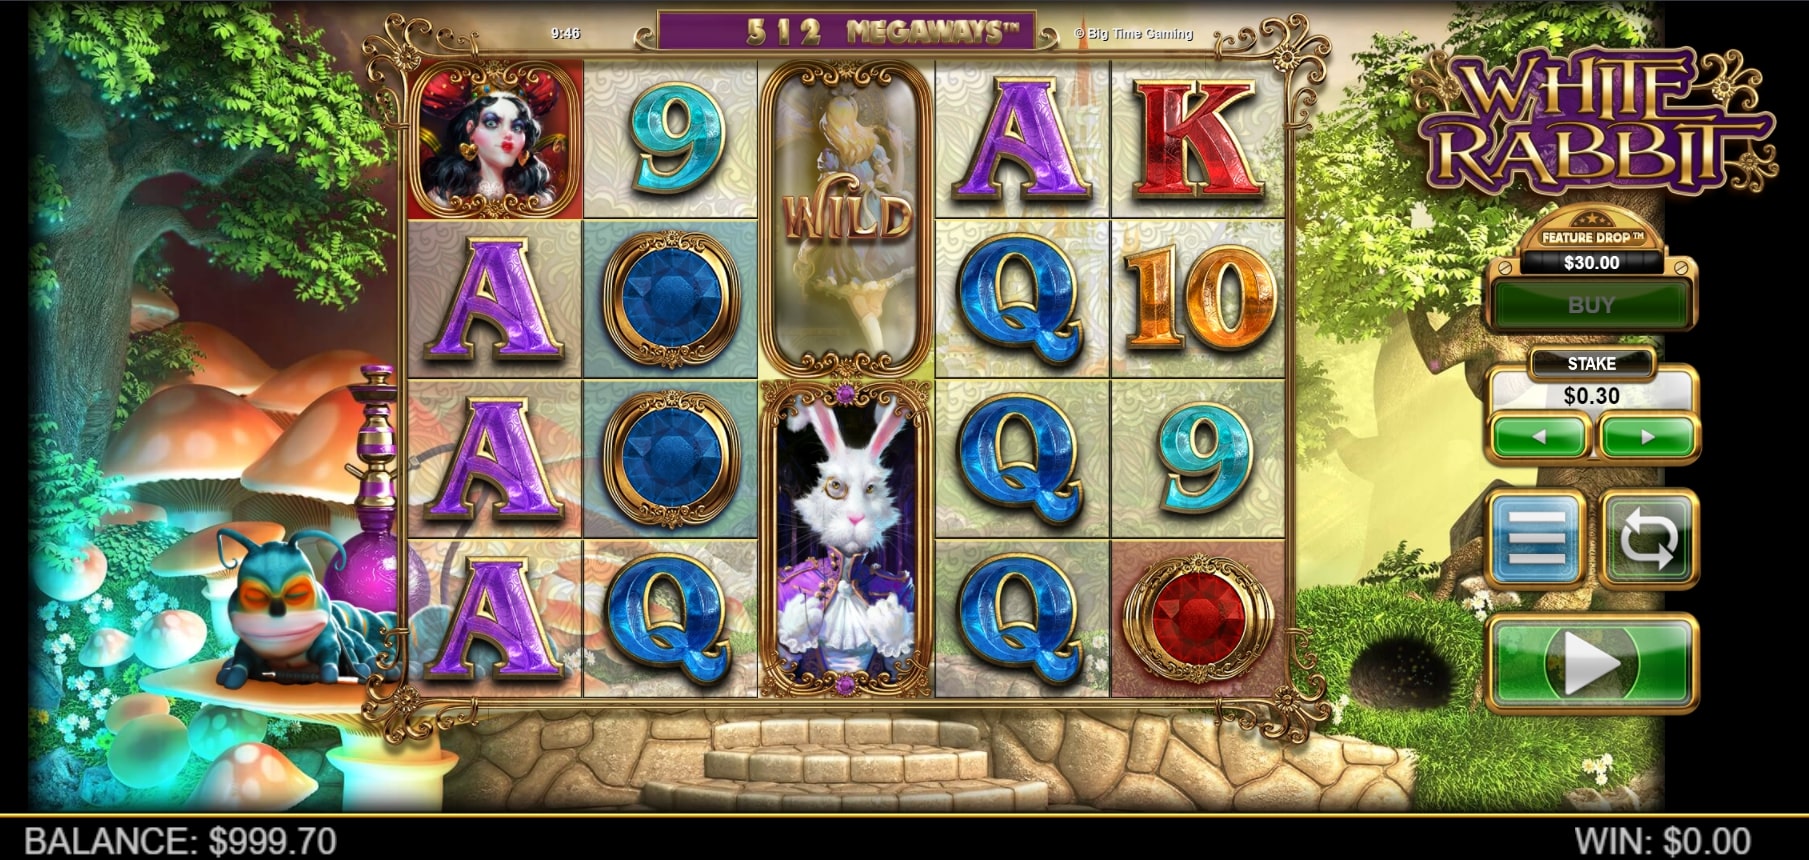 White Rabbit slot screenshot with Alice in Wonderlands characters and colorful graphics